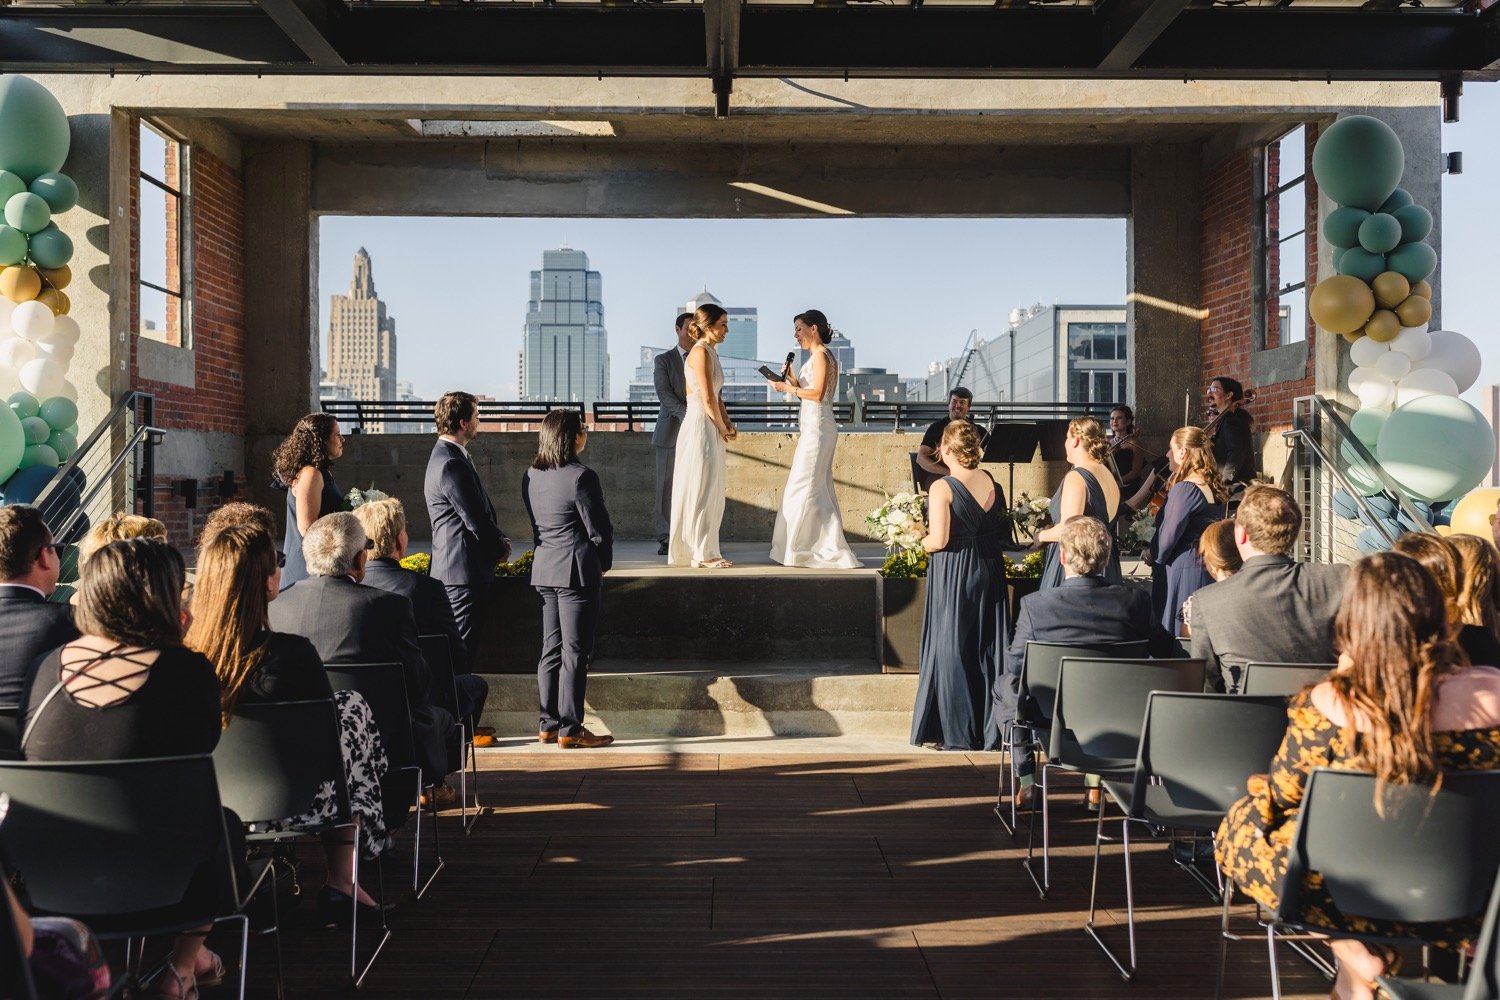 A view of a wedding at Corrigan Station in Kansas City